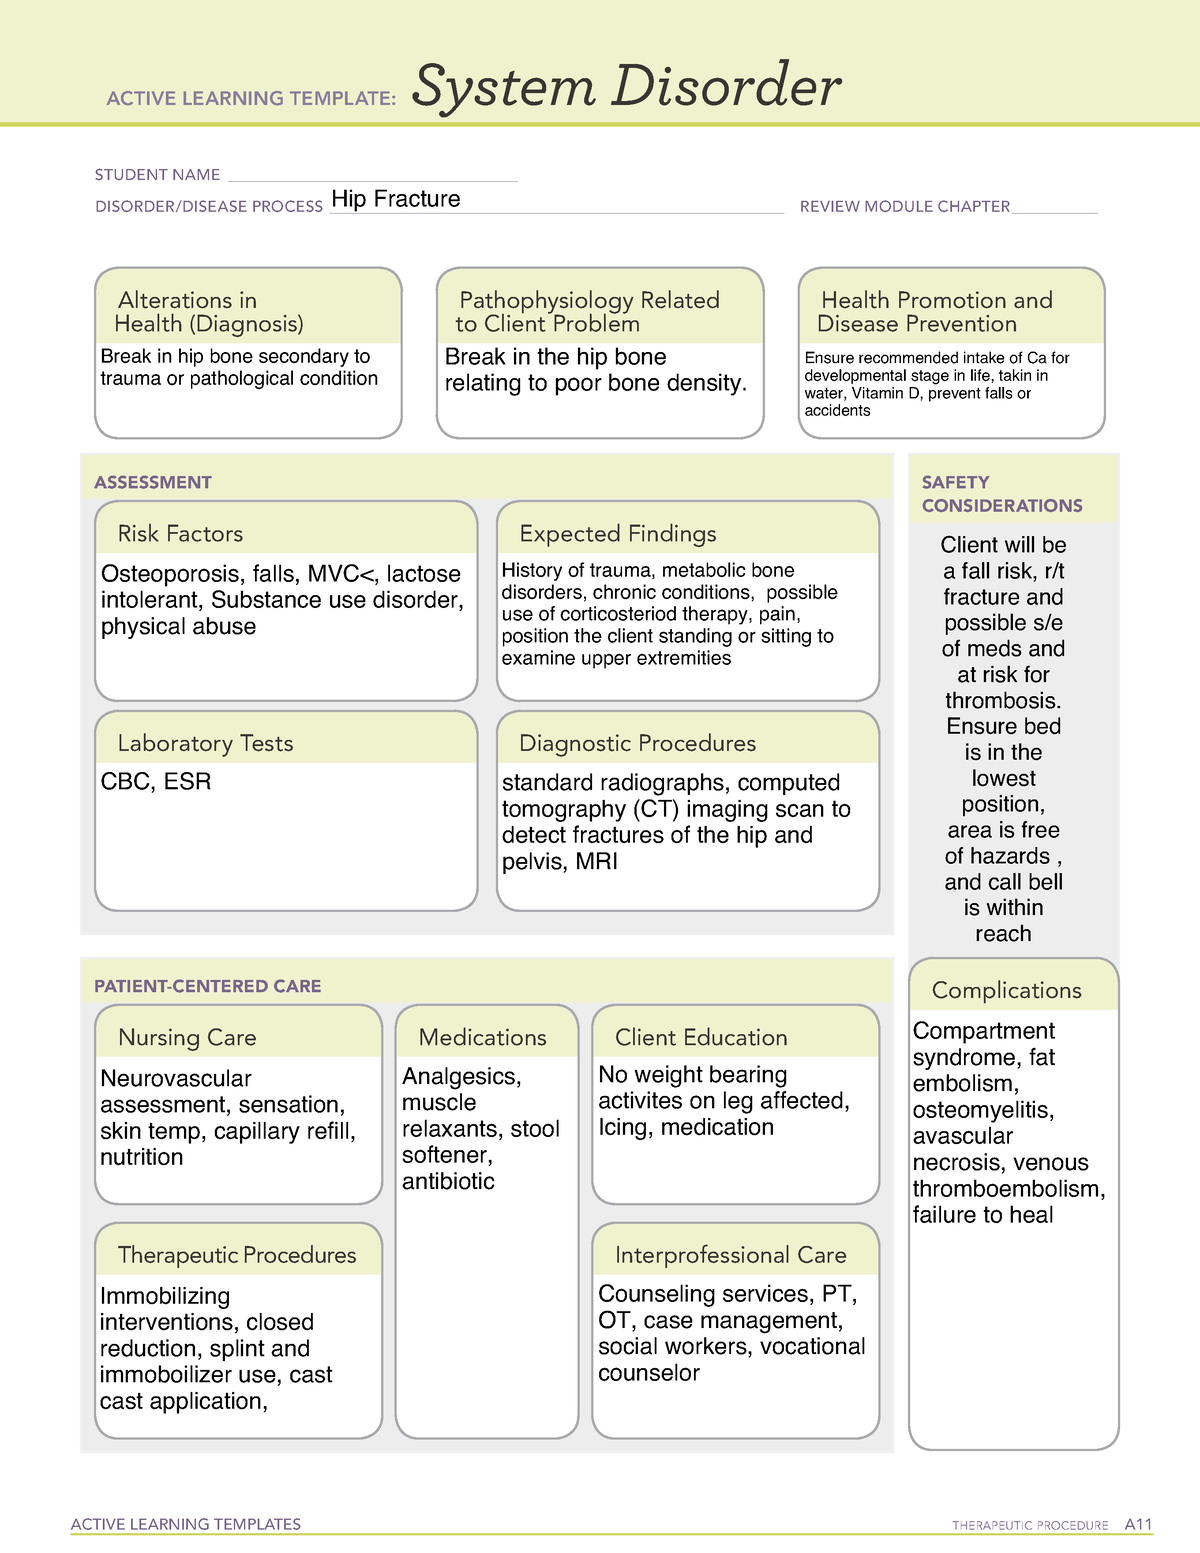 patho-hip-fracture-ati-med-temp-active-learning-templates